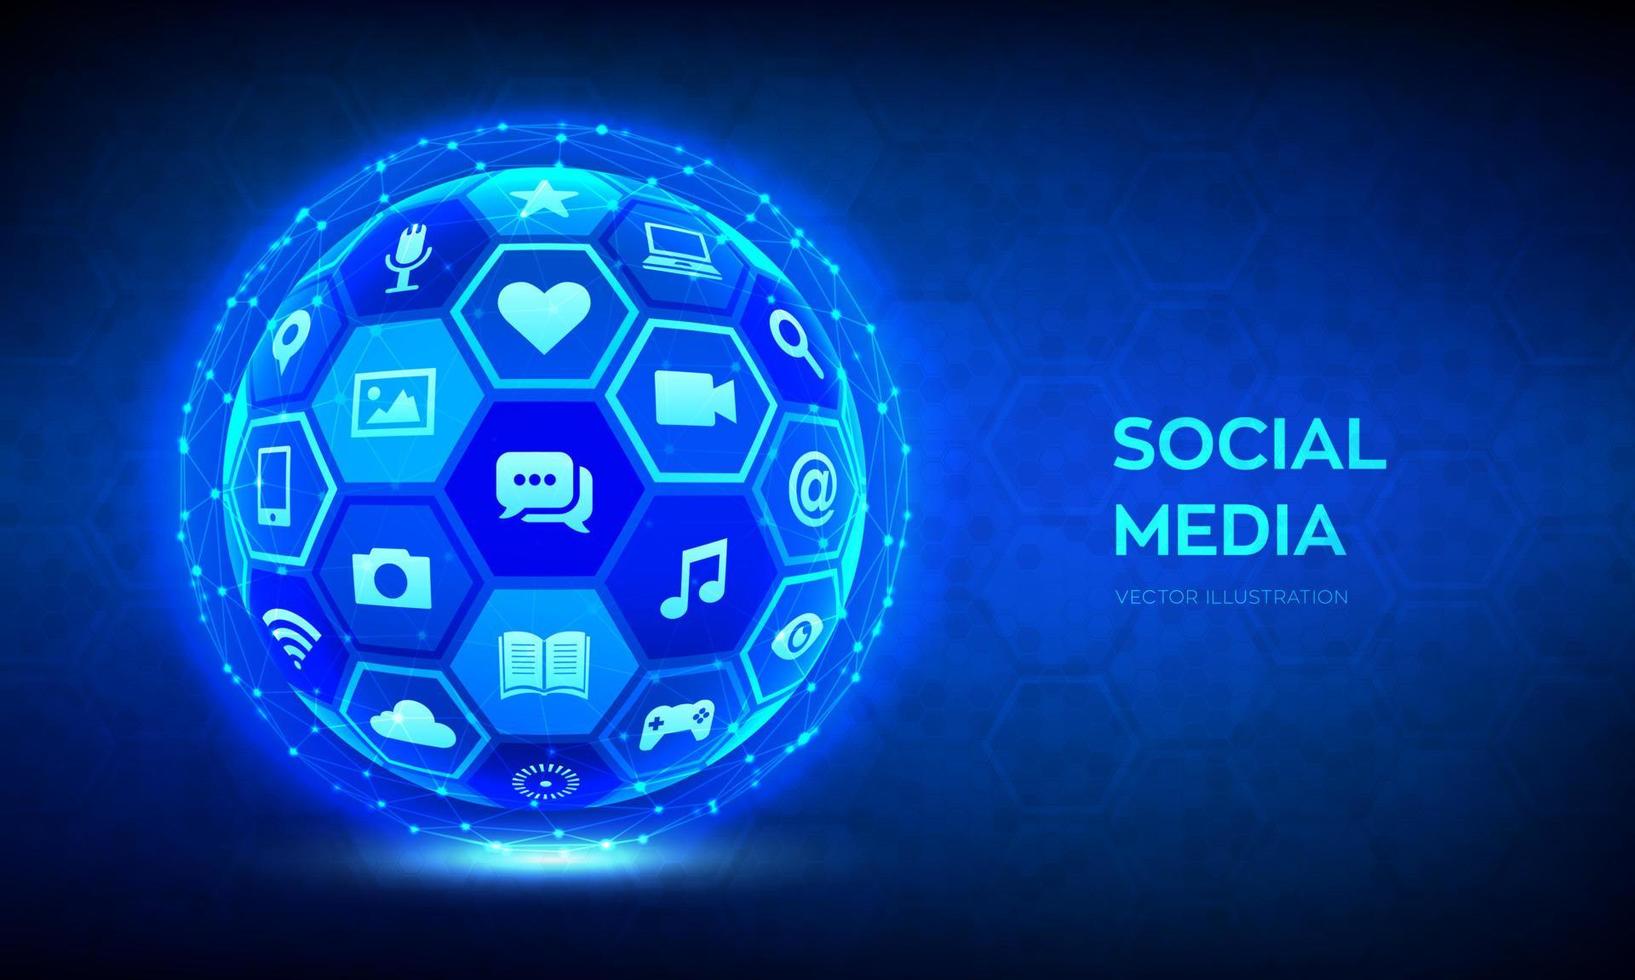 Social media global connection concept. Social networking and blogging. Abstract 3D sphere or globe with surface of hexagons with a different social media and computer icons. Vector illustration.